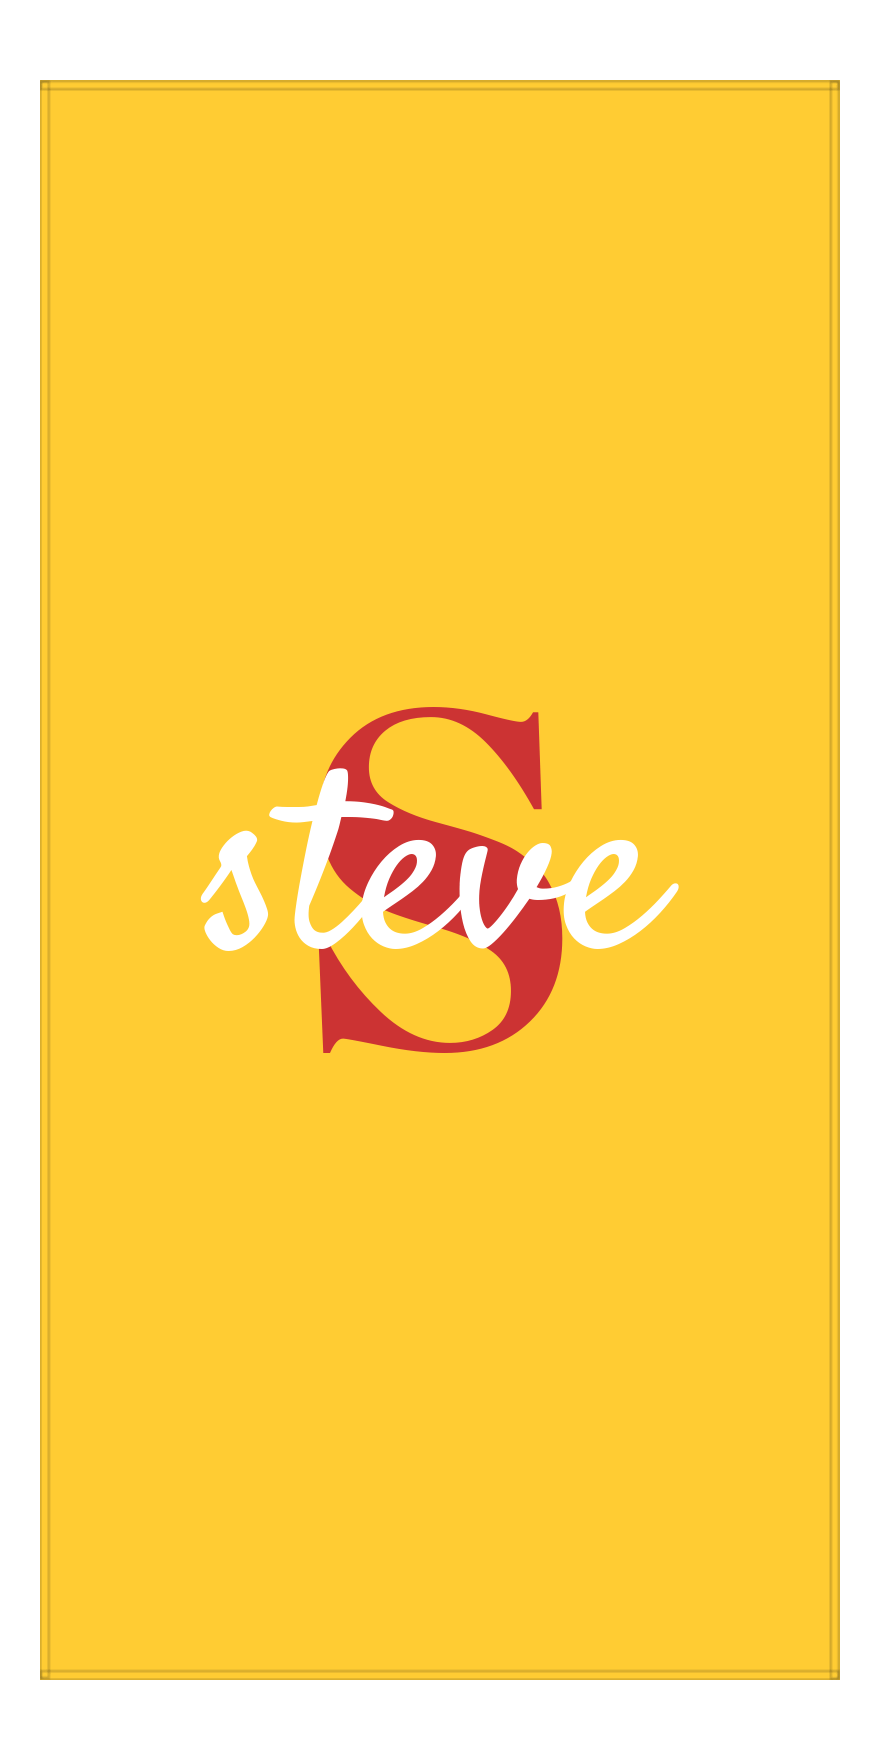 Personalized Solid Color Beach Towel - Vertical - Yellow Background - Name Over Initial - Front View